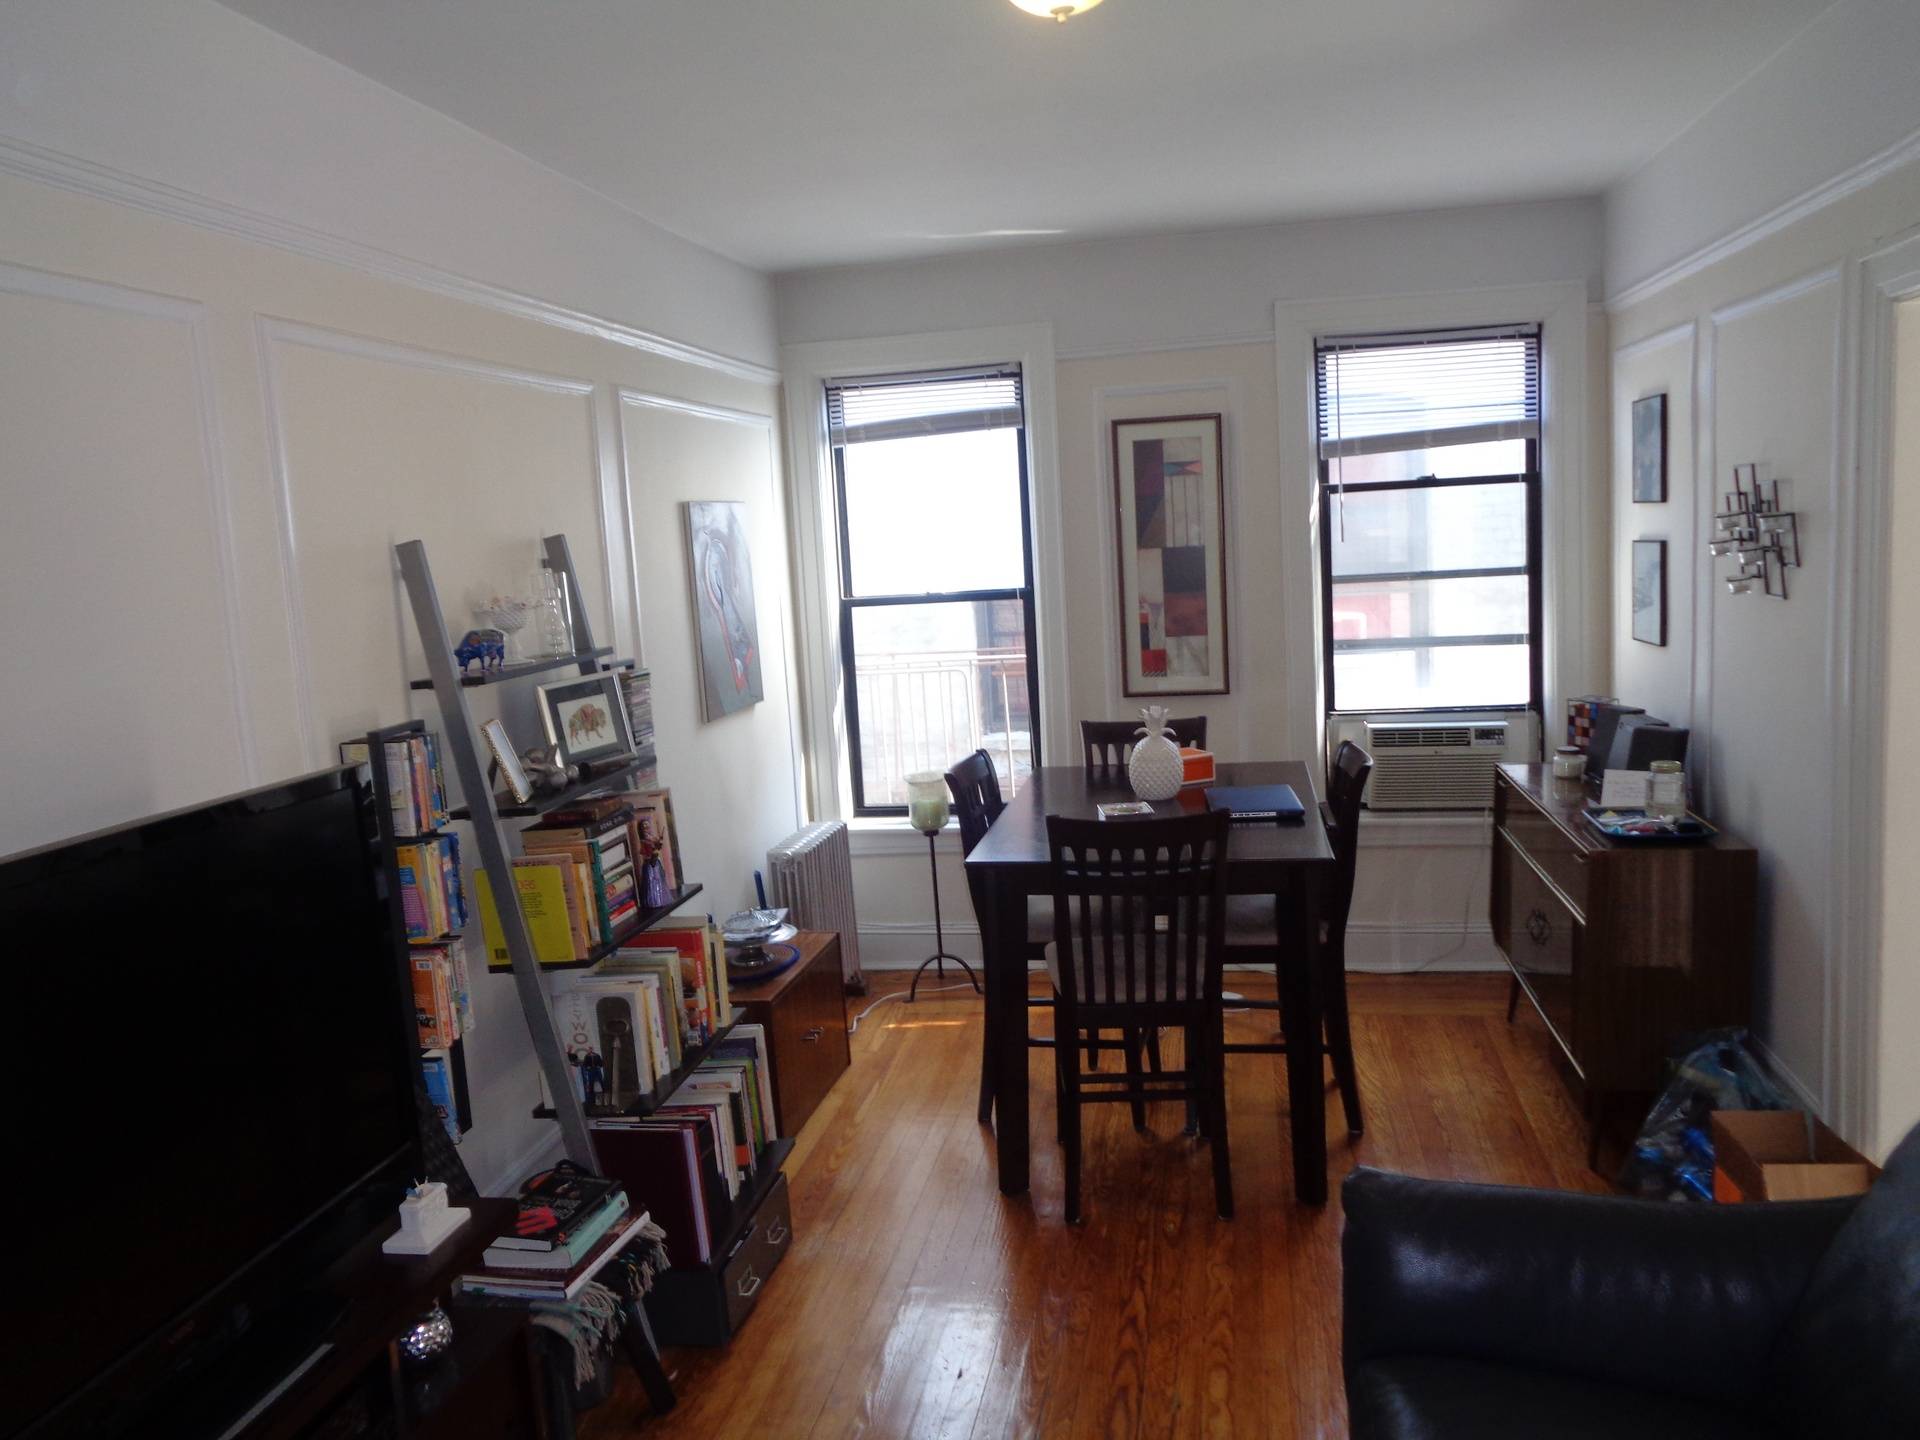 Astoria/LIC: Gut Renovated 1 Bedroom For Lease with Dishwasher + Stainless Steel Appliances